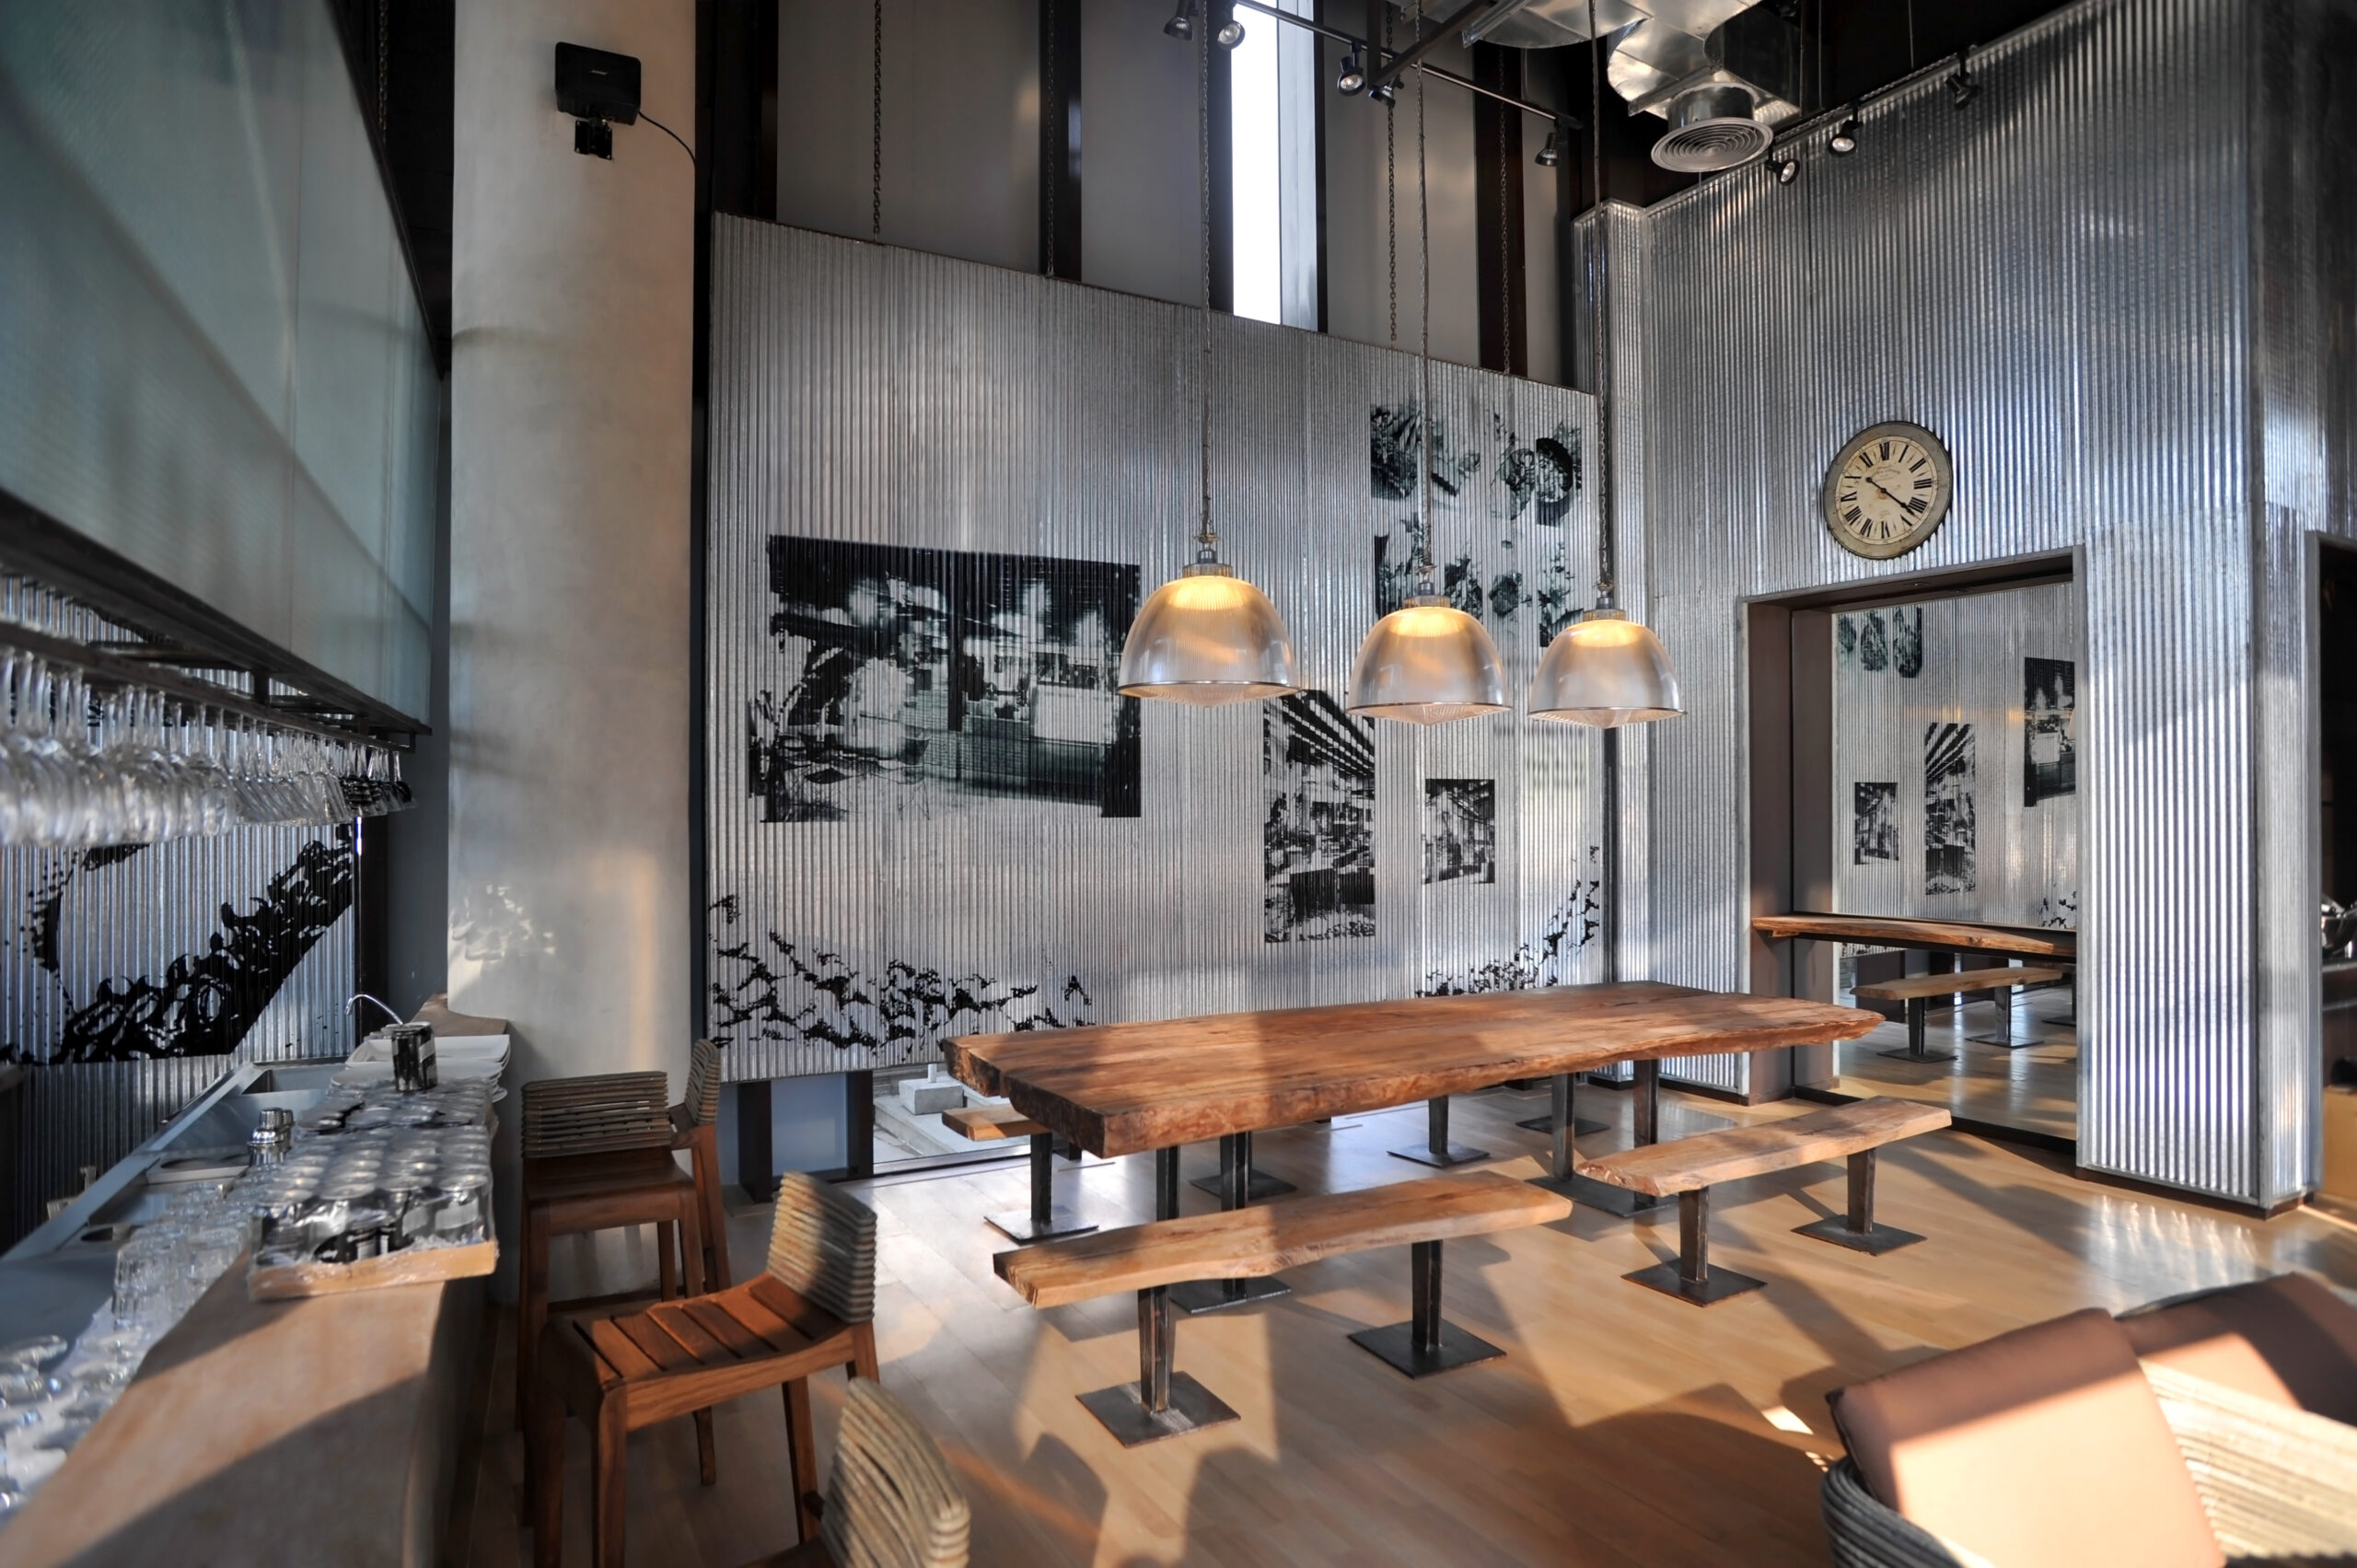 15 Cafe Theme Ideas To Captivate Everyone's Attention